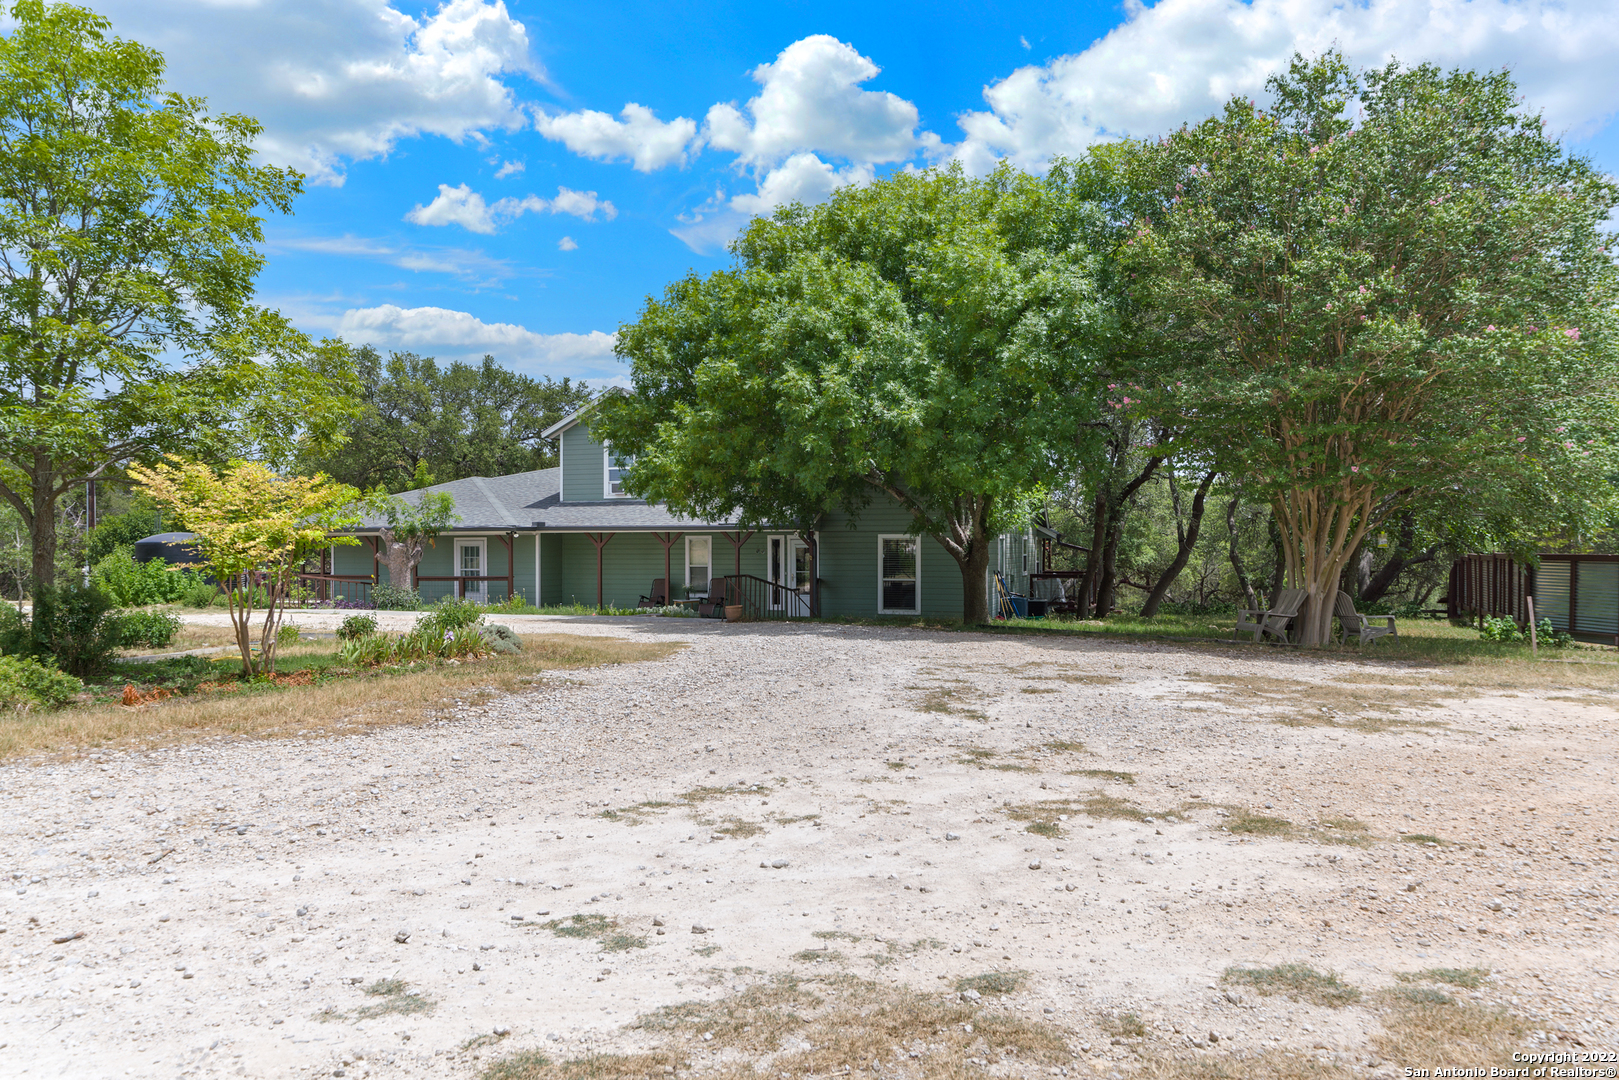 This Expansive property includes 9.76 Acres and 3 dwellings on site. The main house features an impressive 9 bed/4.5 baths and 3200 sqft. The second home includes 3bed/1bath and 1,000+/-sqft currently leased until 4/23/2023. The third home includes 1bed/1bath and loft in 900+/- sqft and currently leased until 11/22/2022. The property boasts mature landscaping, fruit trees, an electric security gate, deer fence, small pond, 410' water well, and New septic system. The home includes the option to purchase all furnishings. This property offers many opportunities to generate revenue or provide an impressive homestead on idyllic acreage.